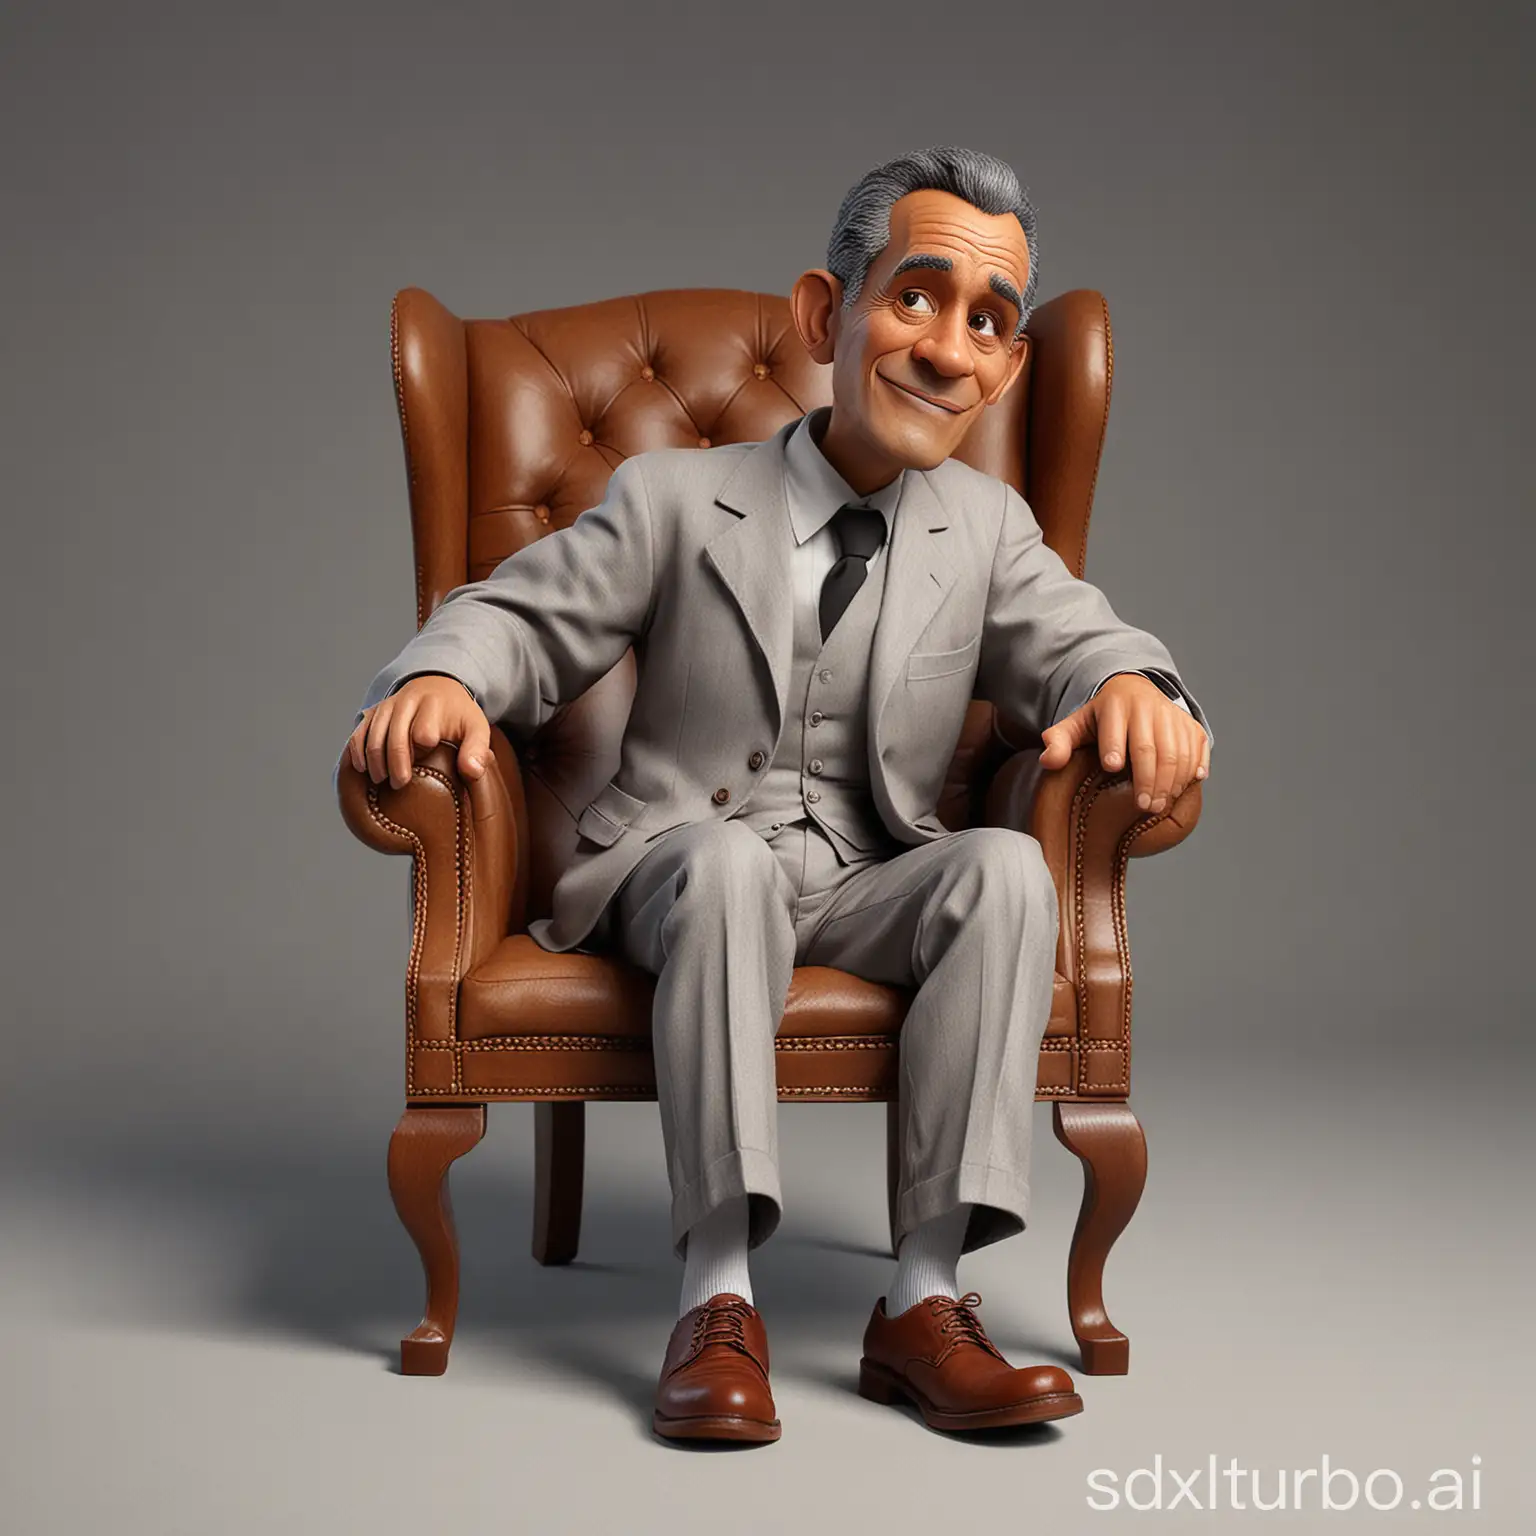 Obama, 3D Realistic Disney pixar style full body with a big head. Albraham Lincoln, a 60 year old man, is sitting relaxed in a classic brown color wingback wooden chair, the wood texture is clear. Wearing a white t-shirt covered with a gray jacket, wearing worn gray cloth trousers. Wearing brown shoes with black shoelaces. Sit with your legs crossed, your right hand holding a short wooden stick, your left hand placed on the edge of the chair. The background should contrast with the color of the chair and clothing,enhancing the overall composition of the picture. Use soft photography lighting, dramatic overhead lighting, very high image quality, clear character details, UHD, 16k.